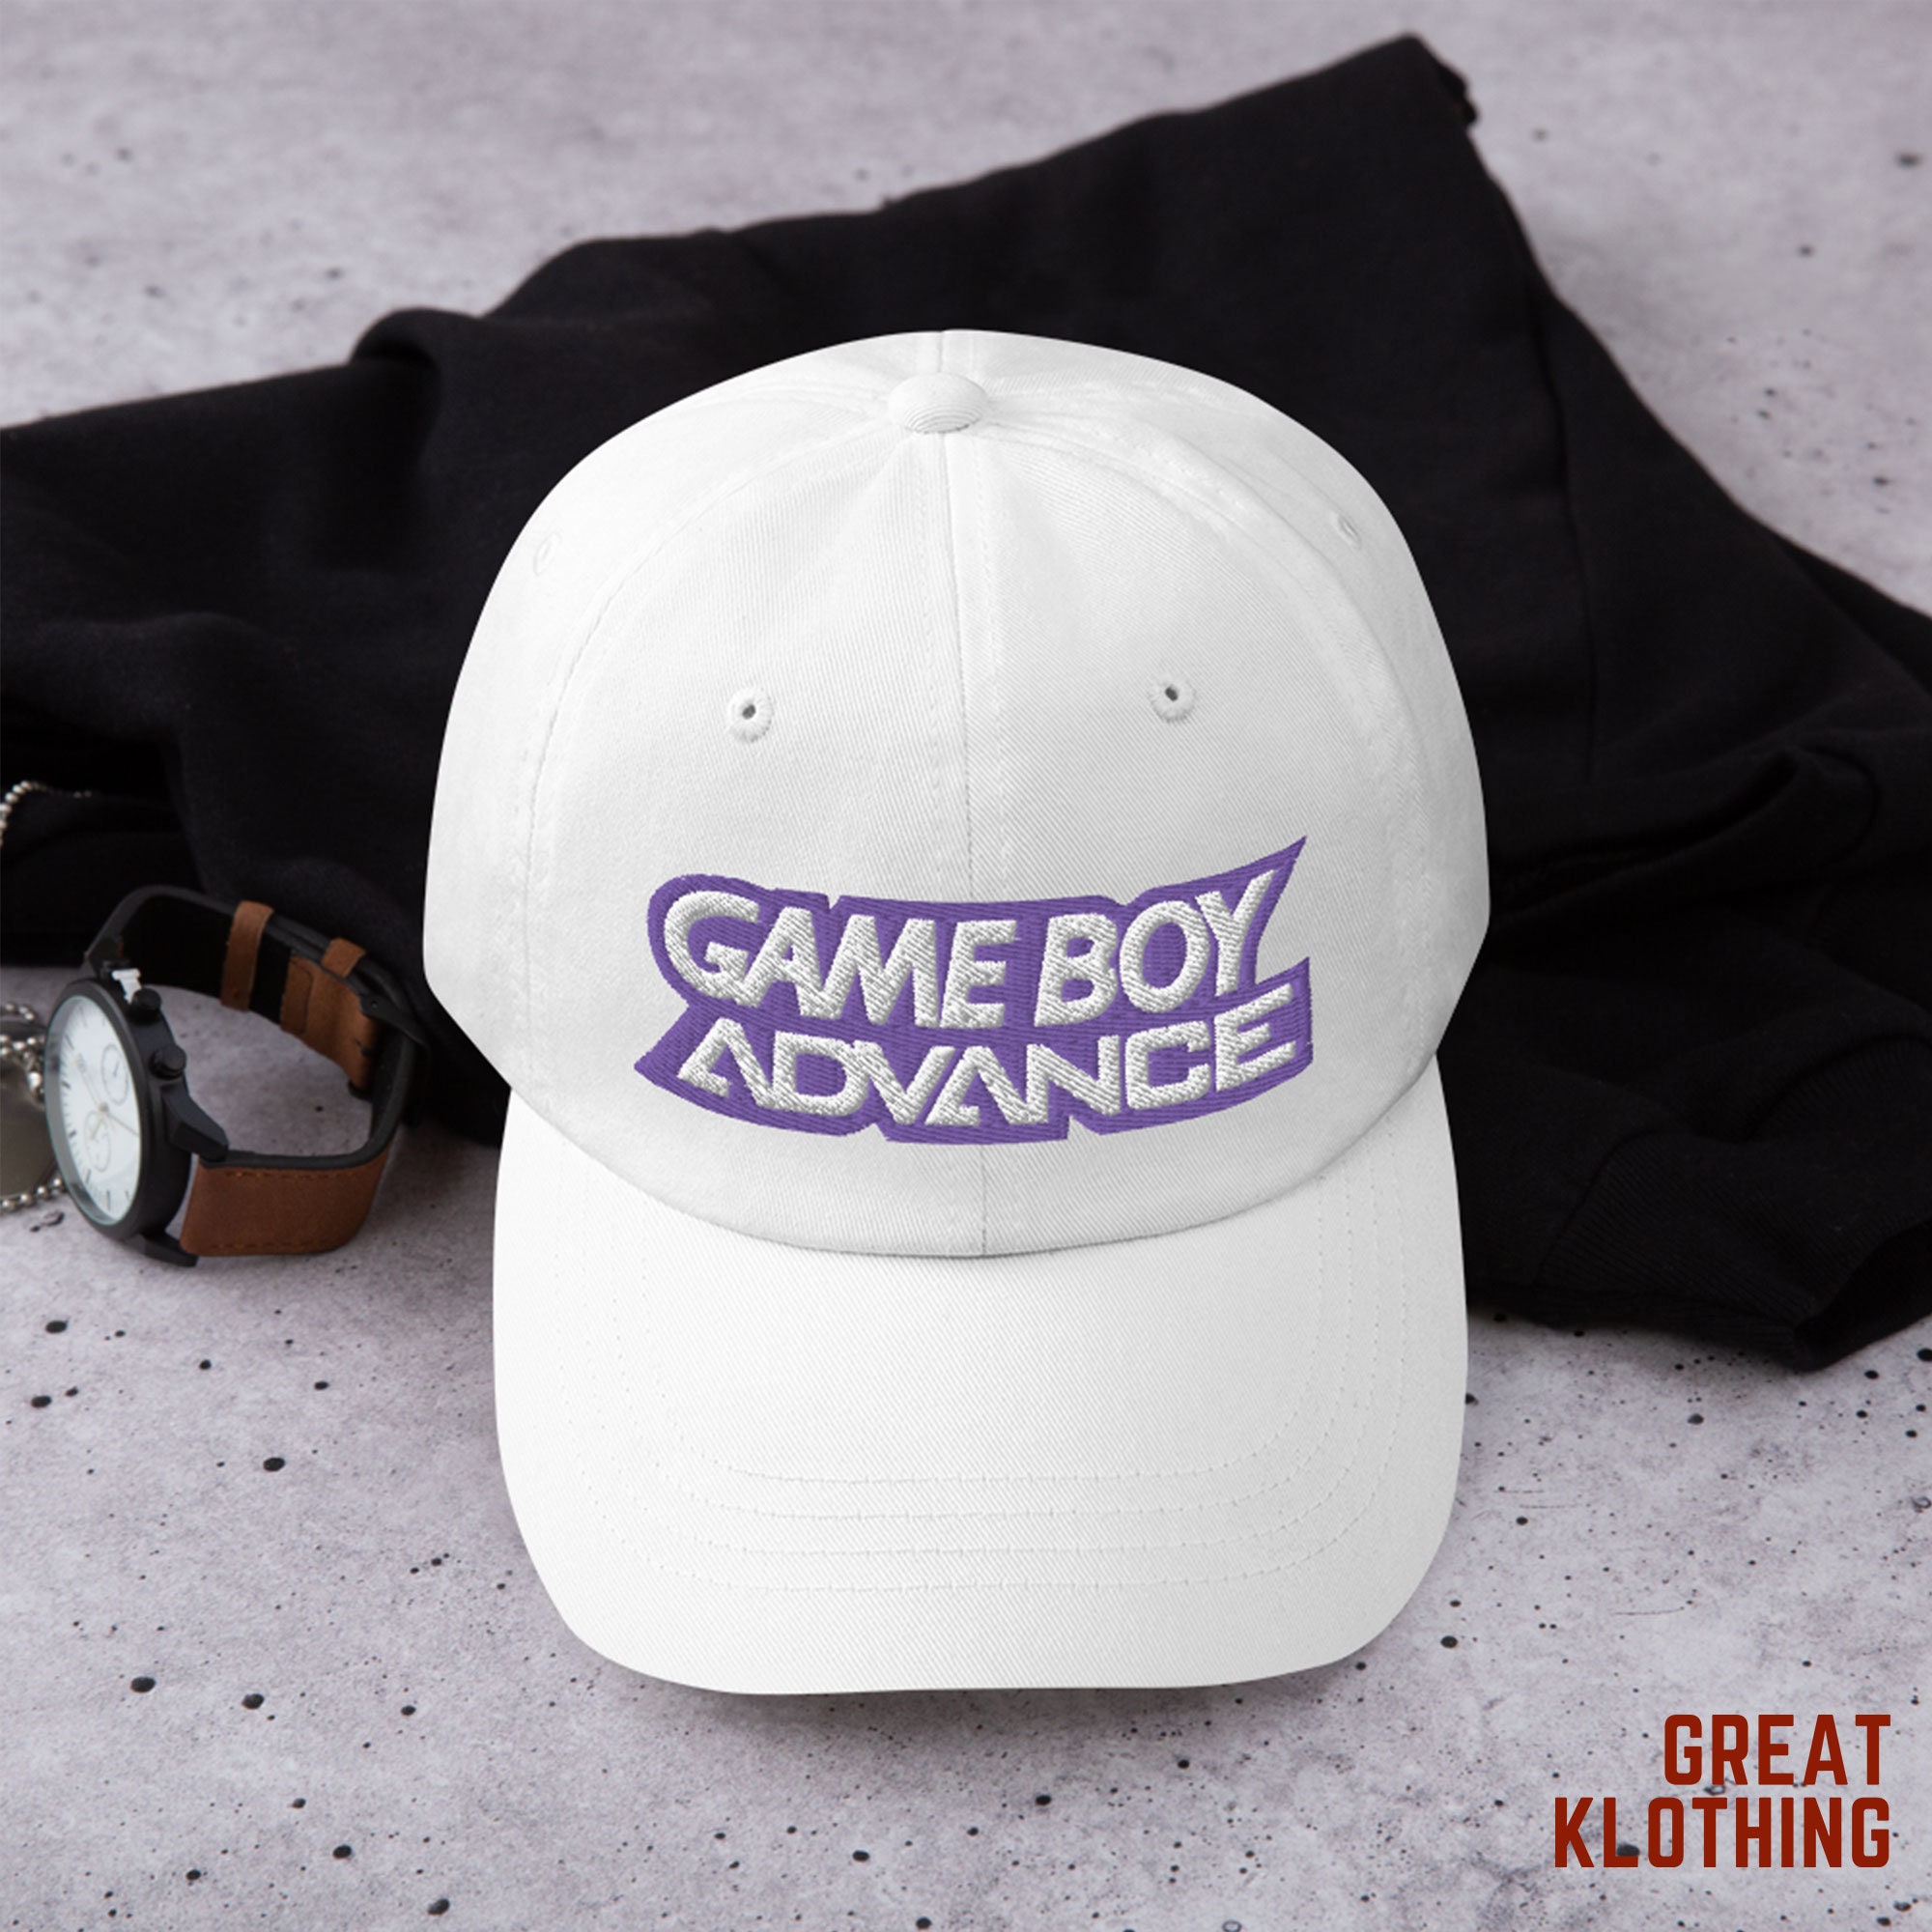 GAMES FOR BOYS 🧢 - Play Online Games!